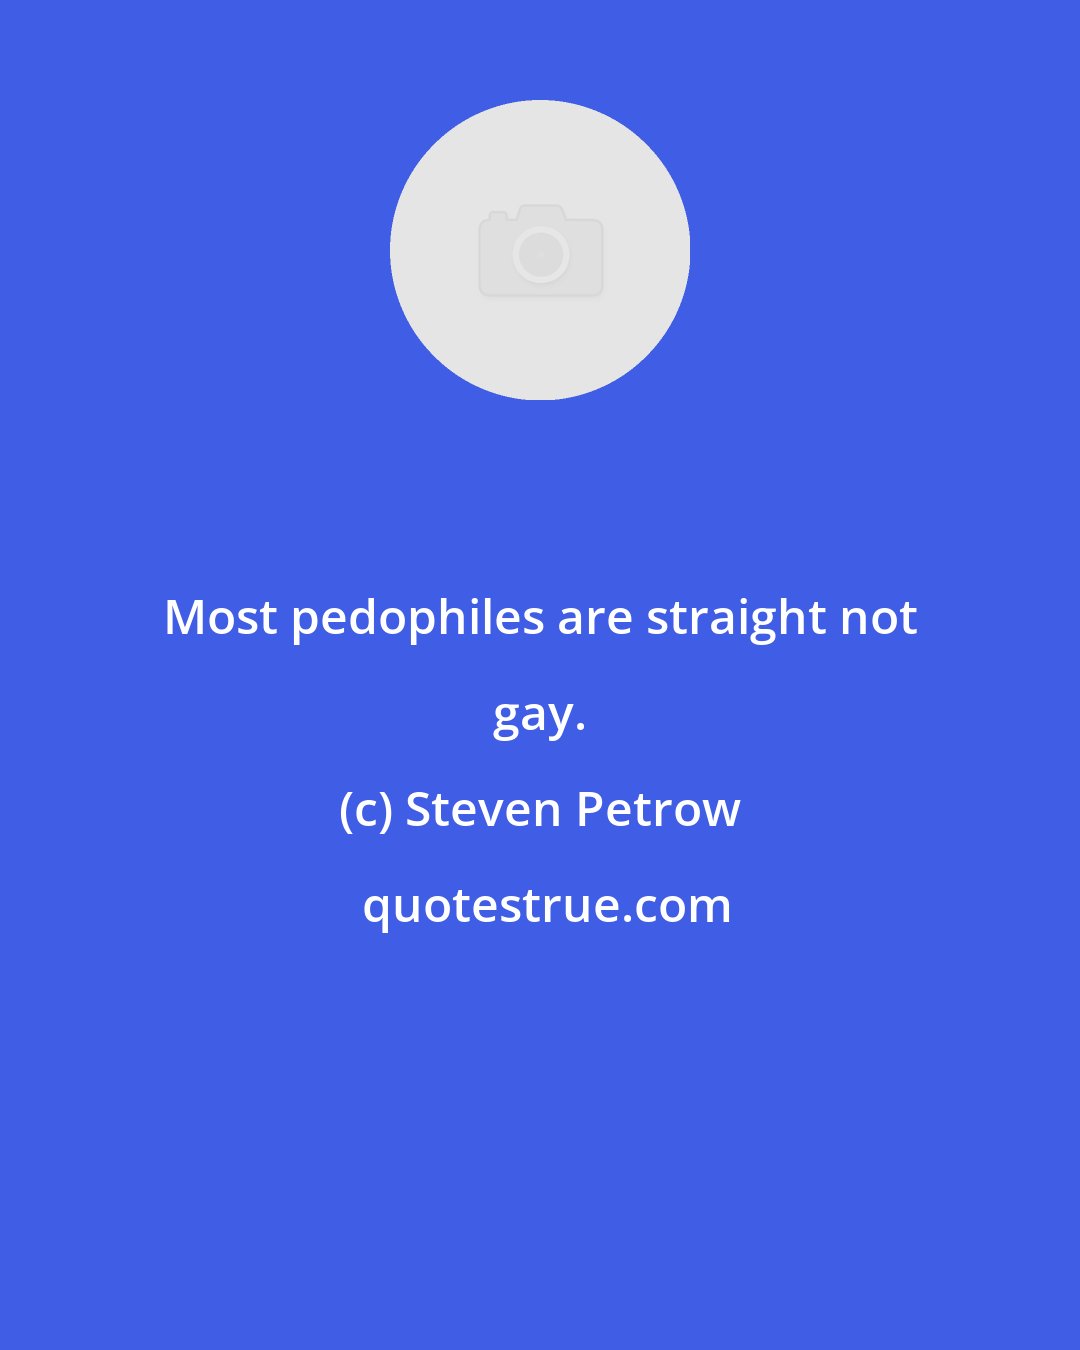 Steven Petrow: Most pedophiles are straight not gay.